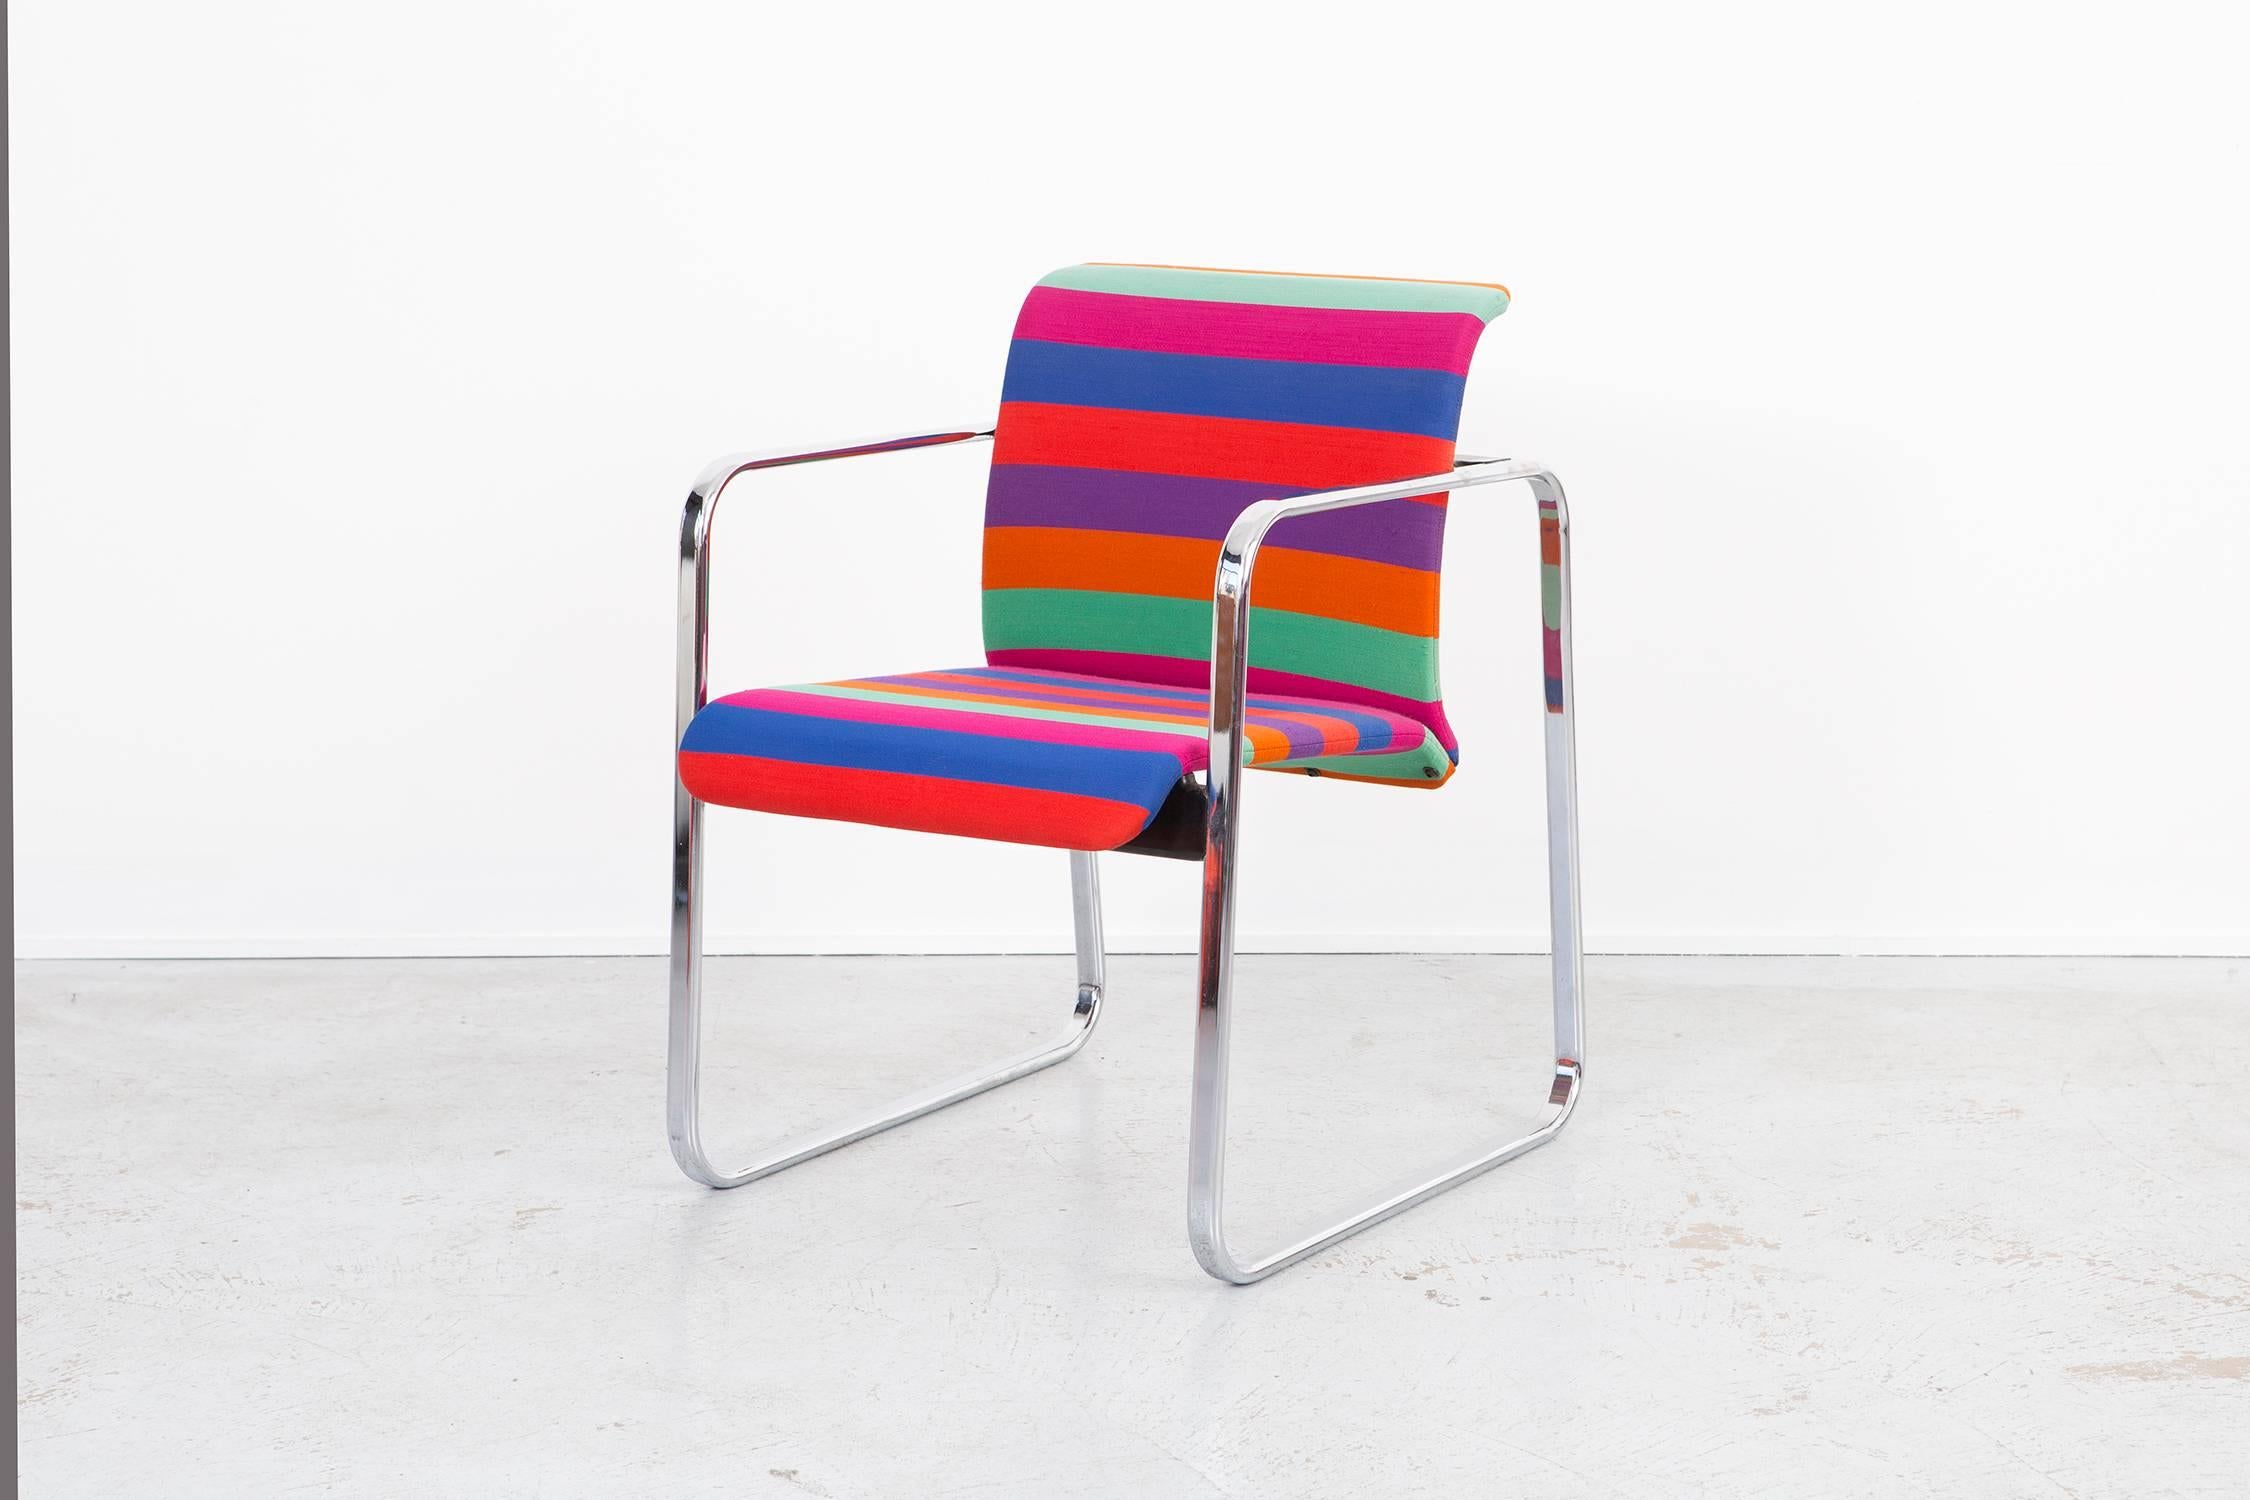 Chrome Chromatic and Vibrant Conference or Dining Chair Set in Alexander Girard Fabric